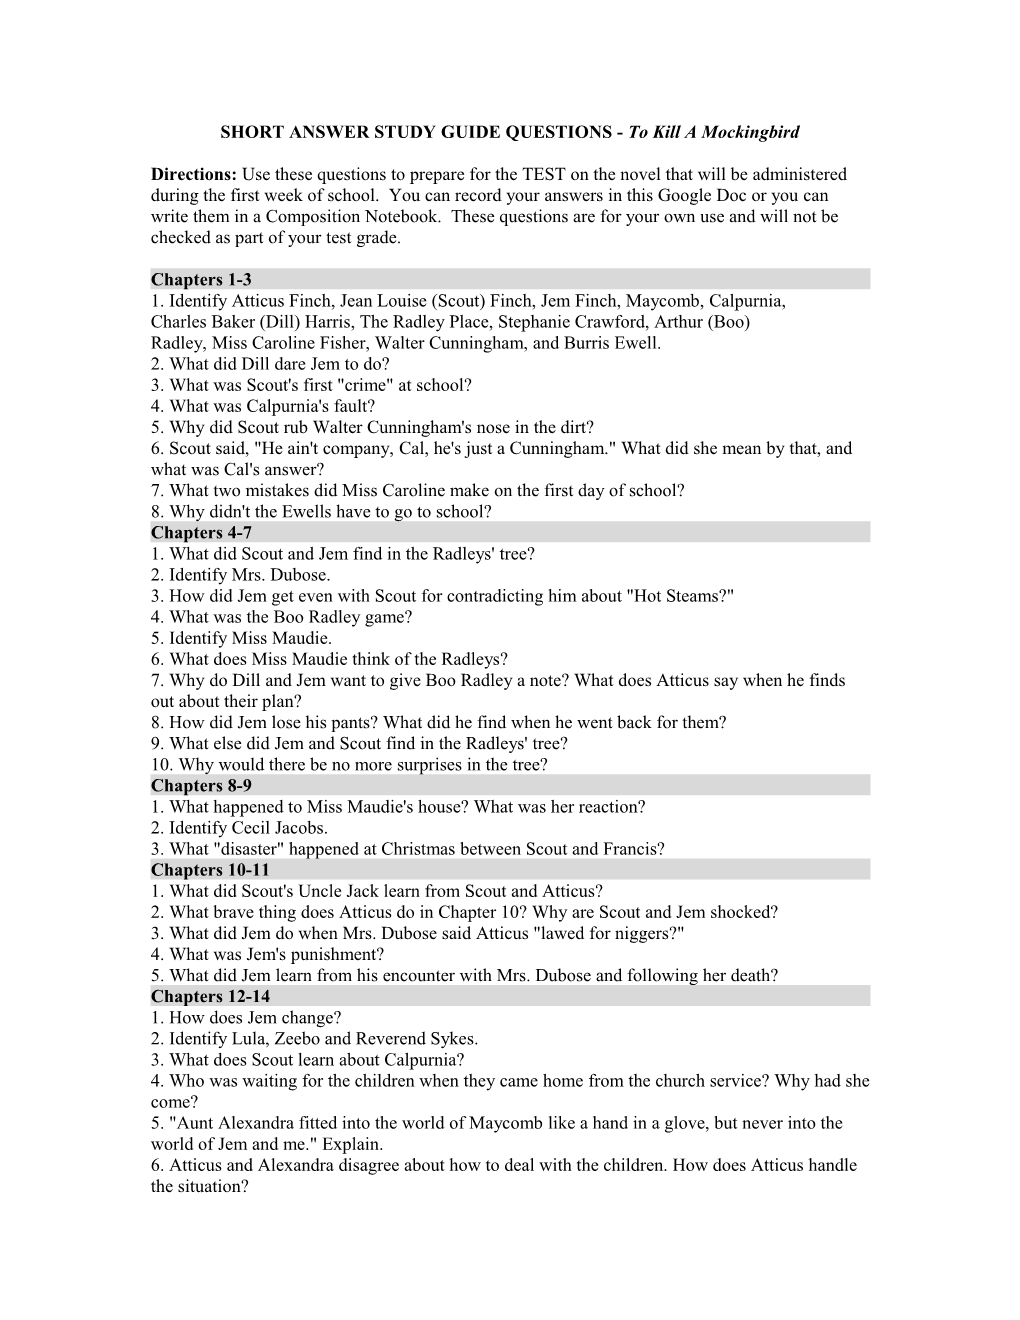 SHORT ANSWER STUDY GUIDE QUESTIONS - to Kill a Mockingbird